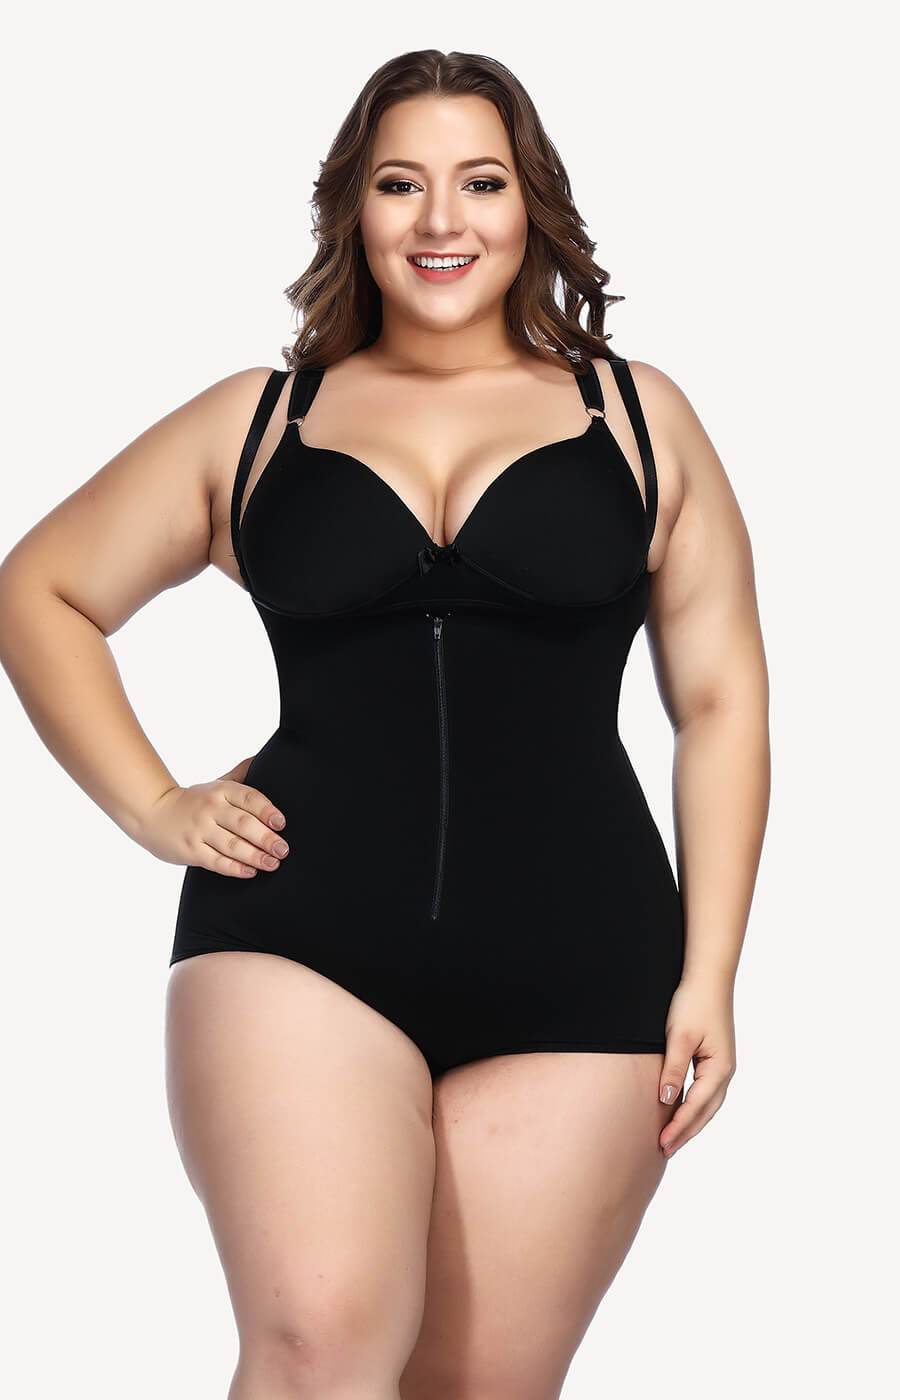 Shapellx Shapewear is Epitome of Female Empowerment